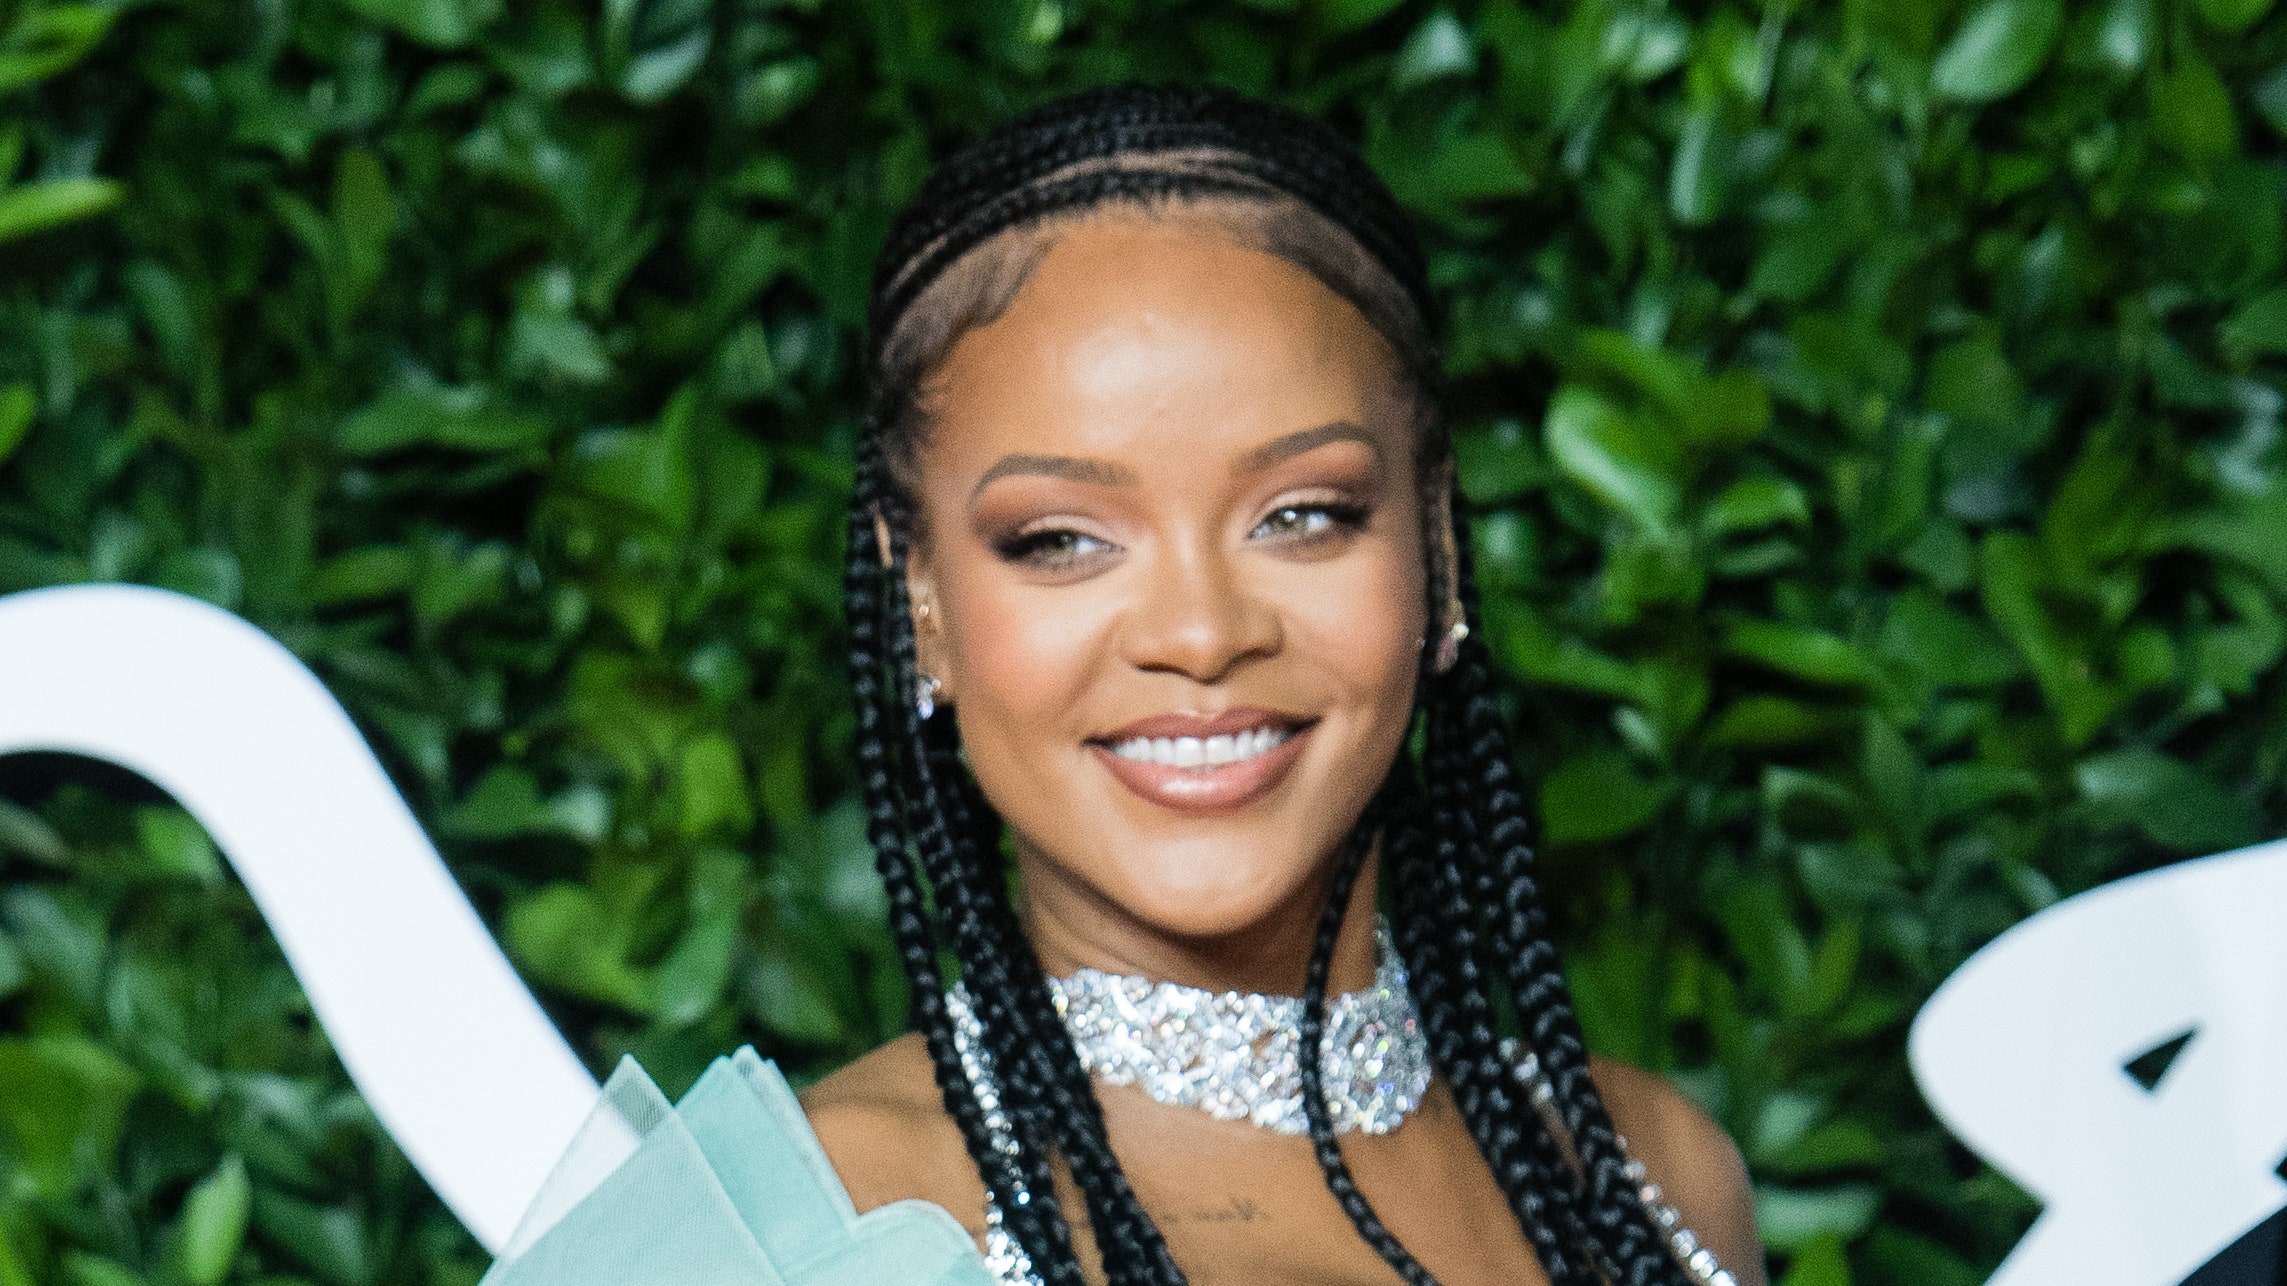 Rihanna Reportedly Has New Music in the Works - Rihanna New Album Songs Music Video